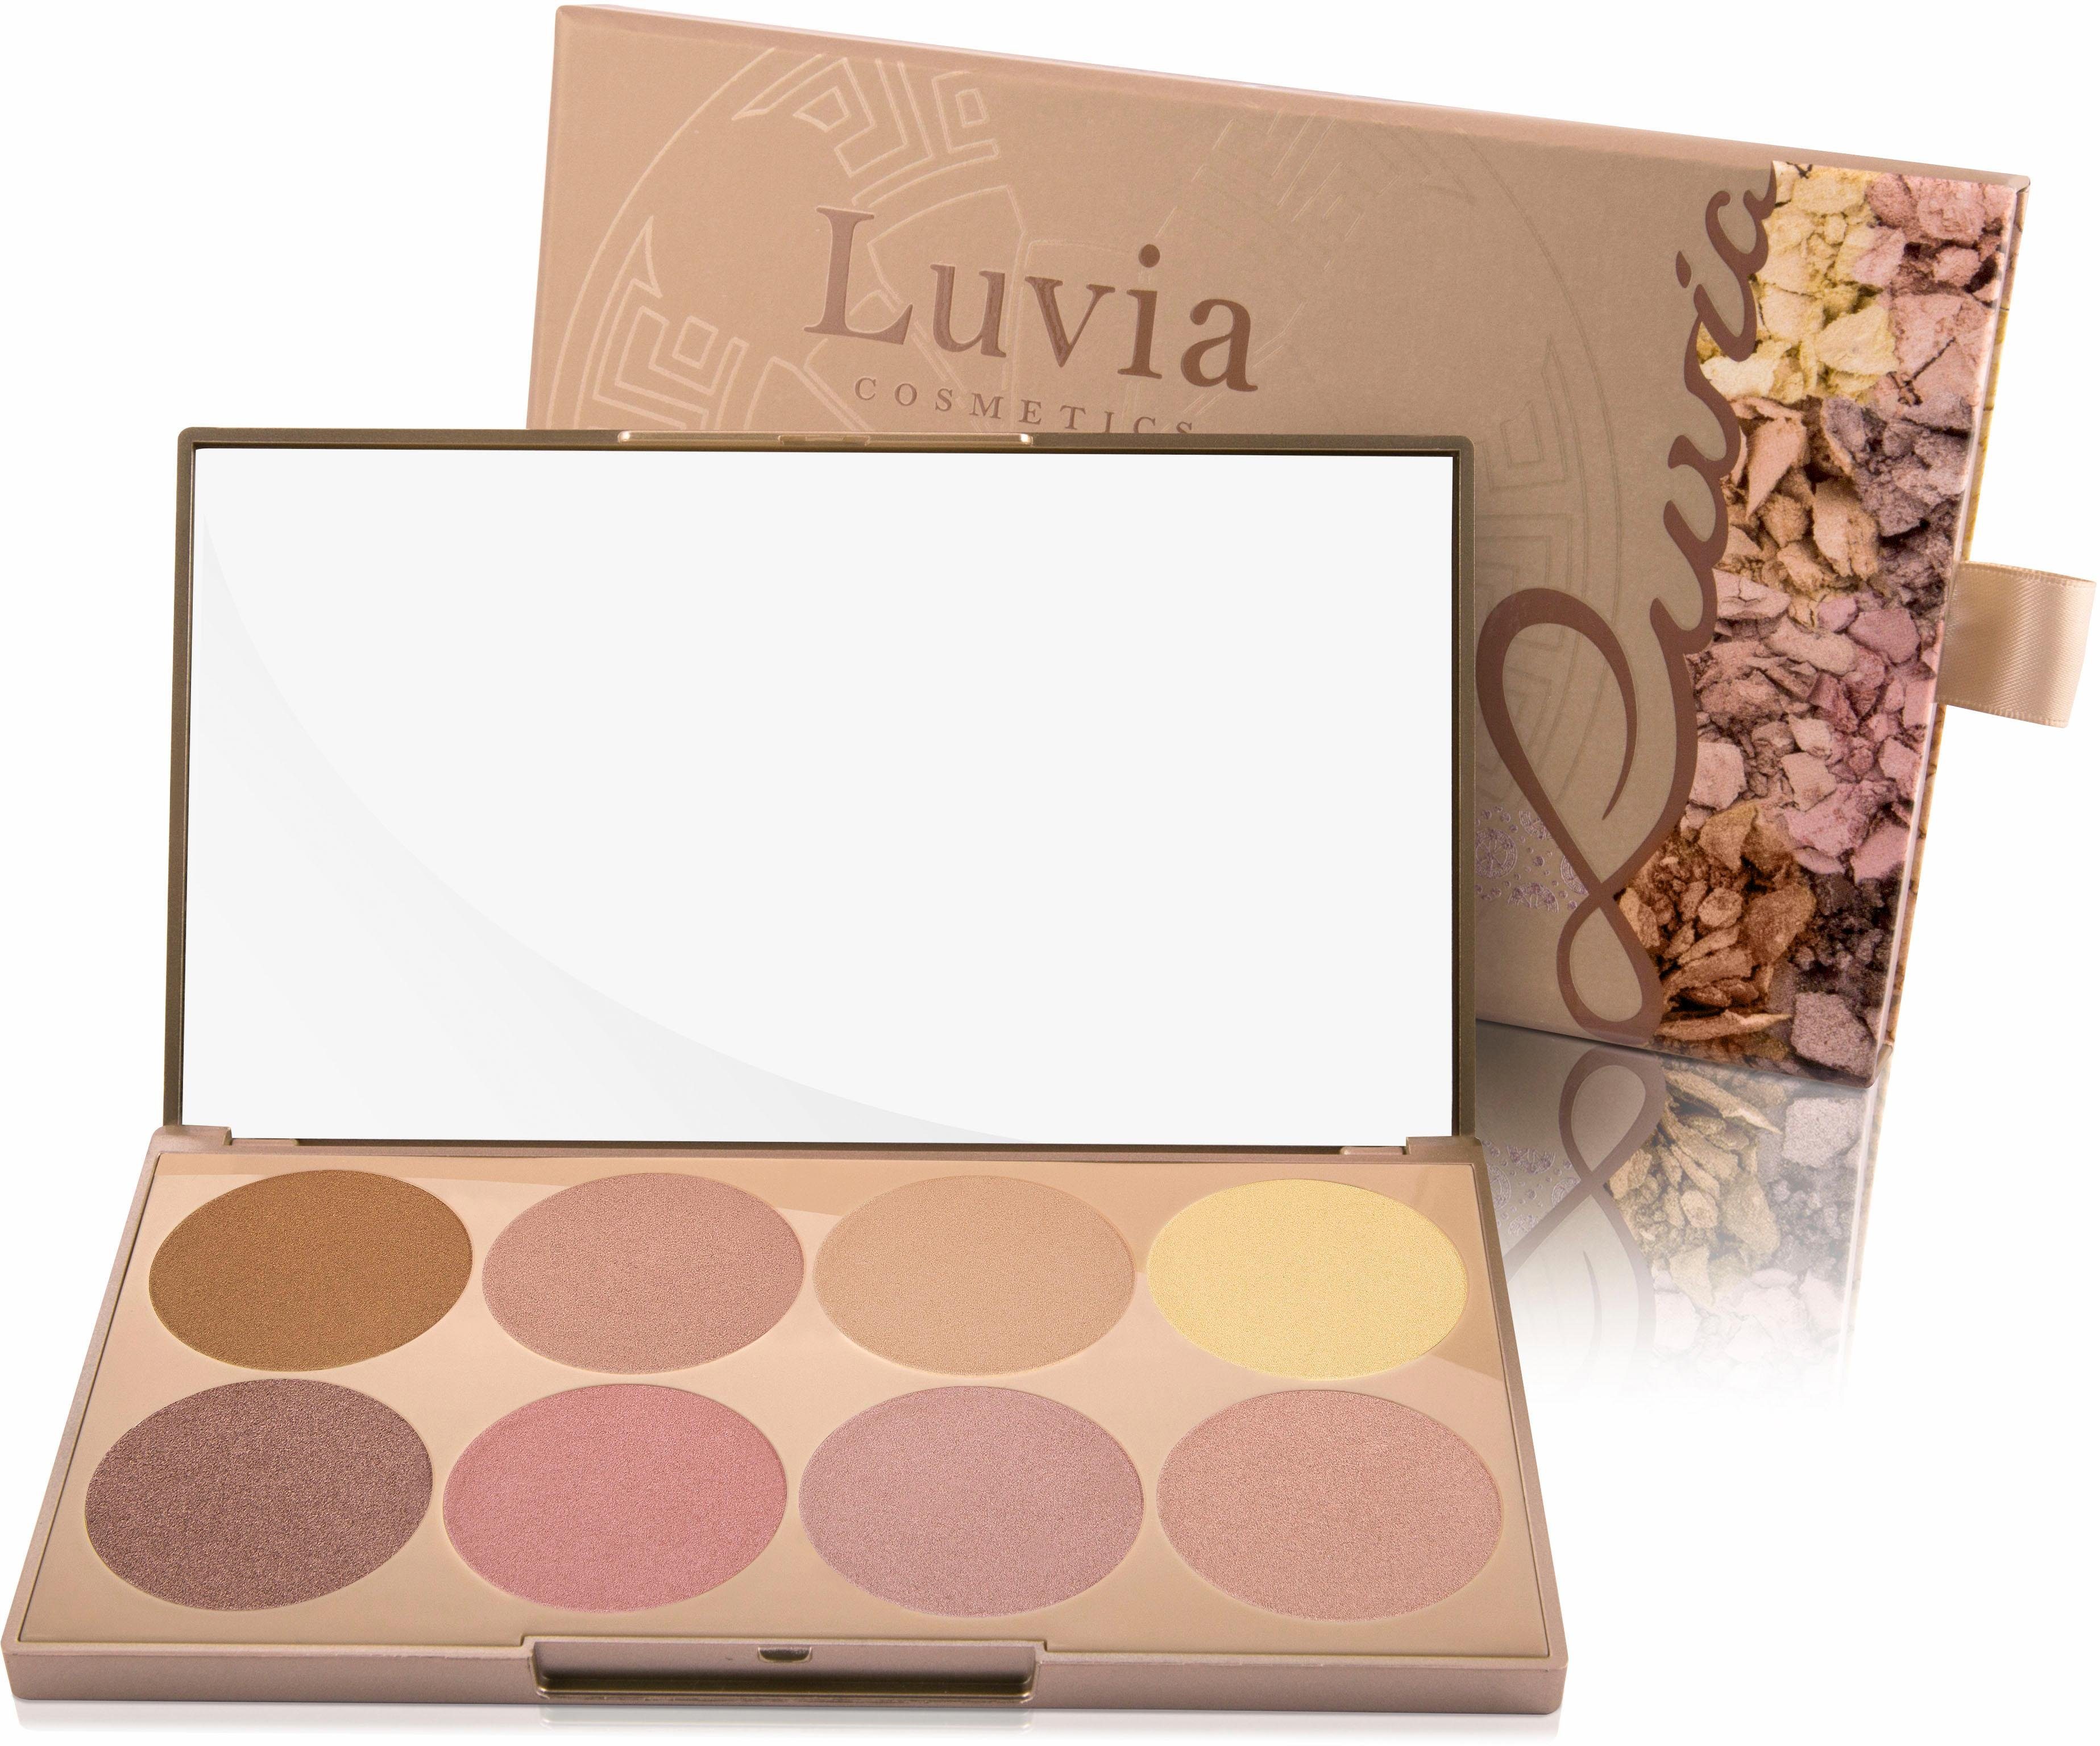 Cosmetics 8-tlg., Vol. - Prime Essential Shades Glow 1, Farben Contouring Luvia 8 Highlighter-Palette